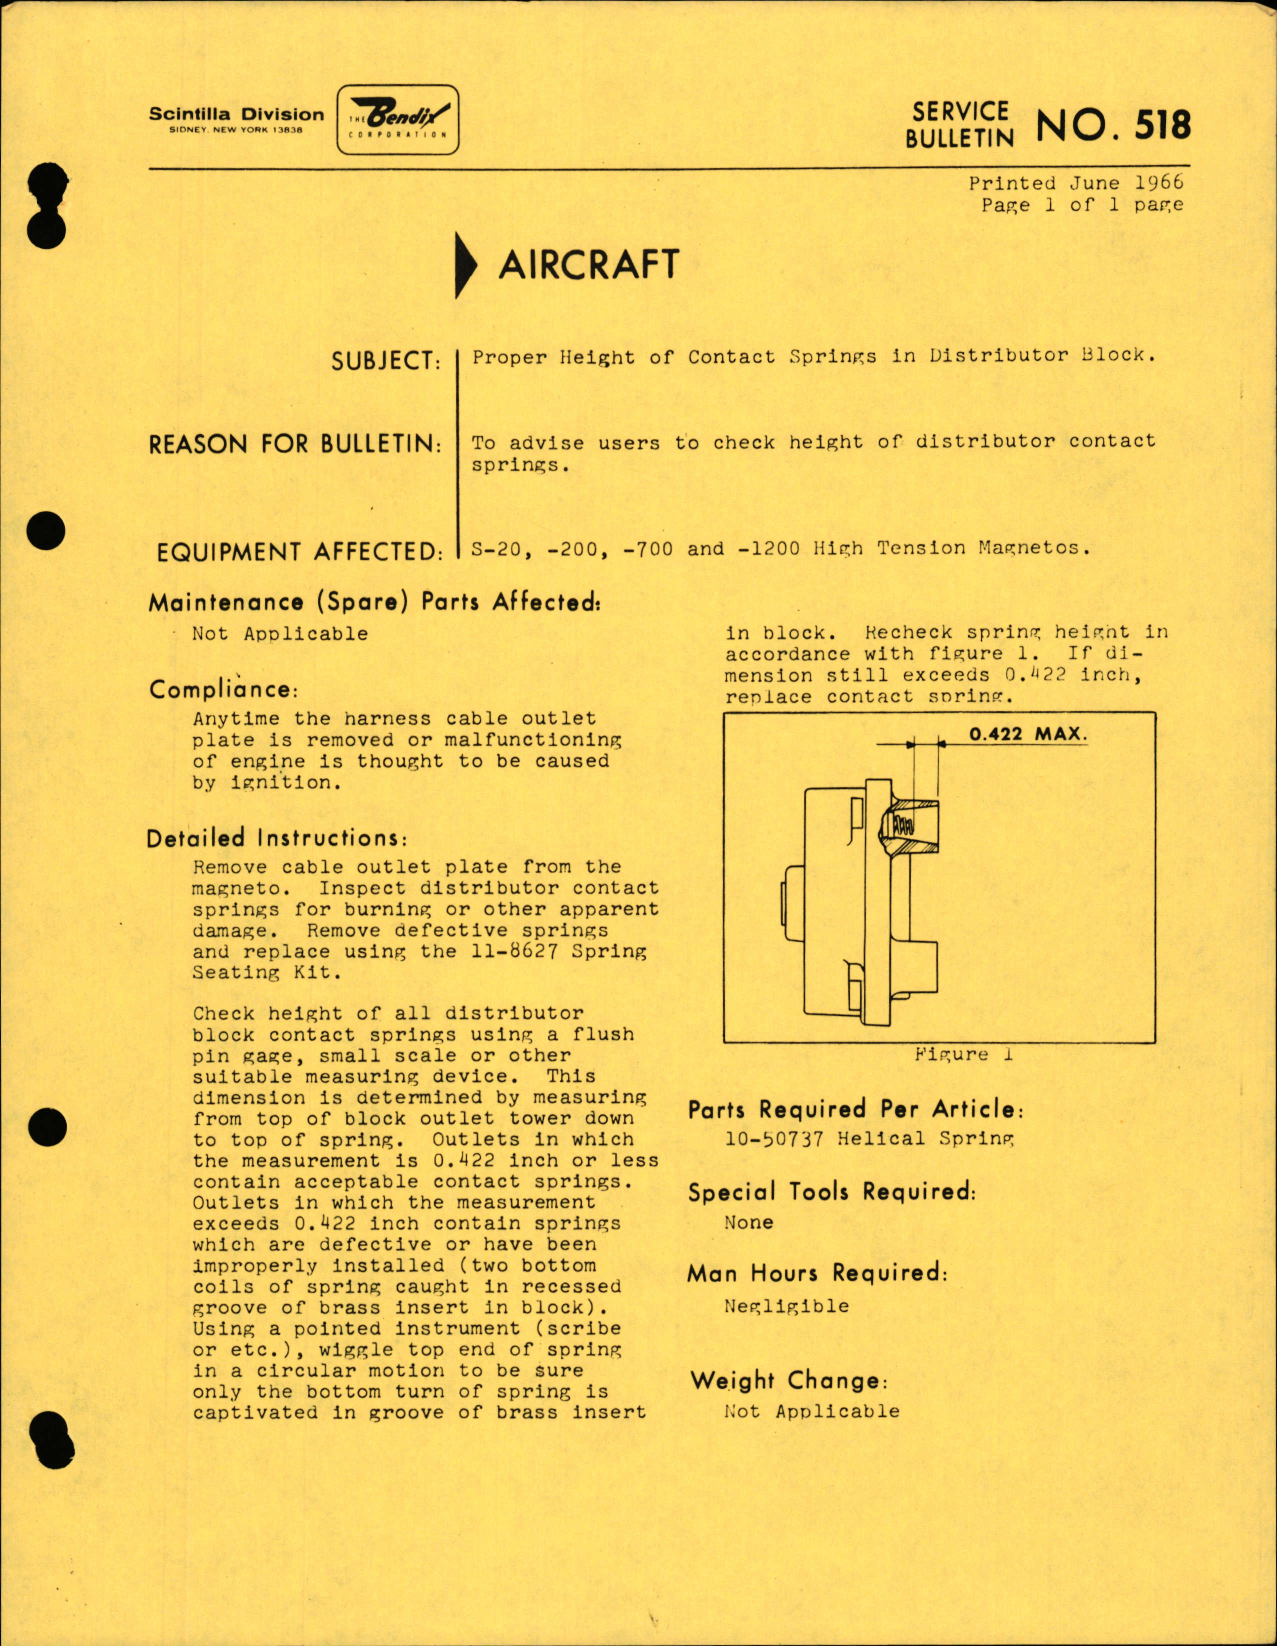 Sample page 1 from AirCorps Library document: Proper Height of Contact Springs in Distributor Block